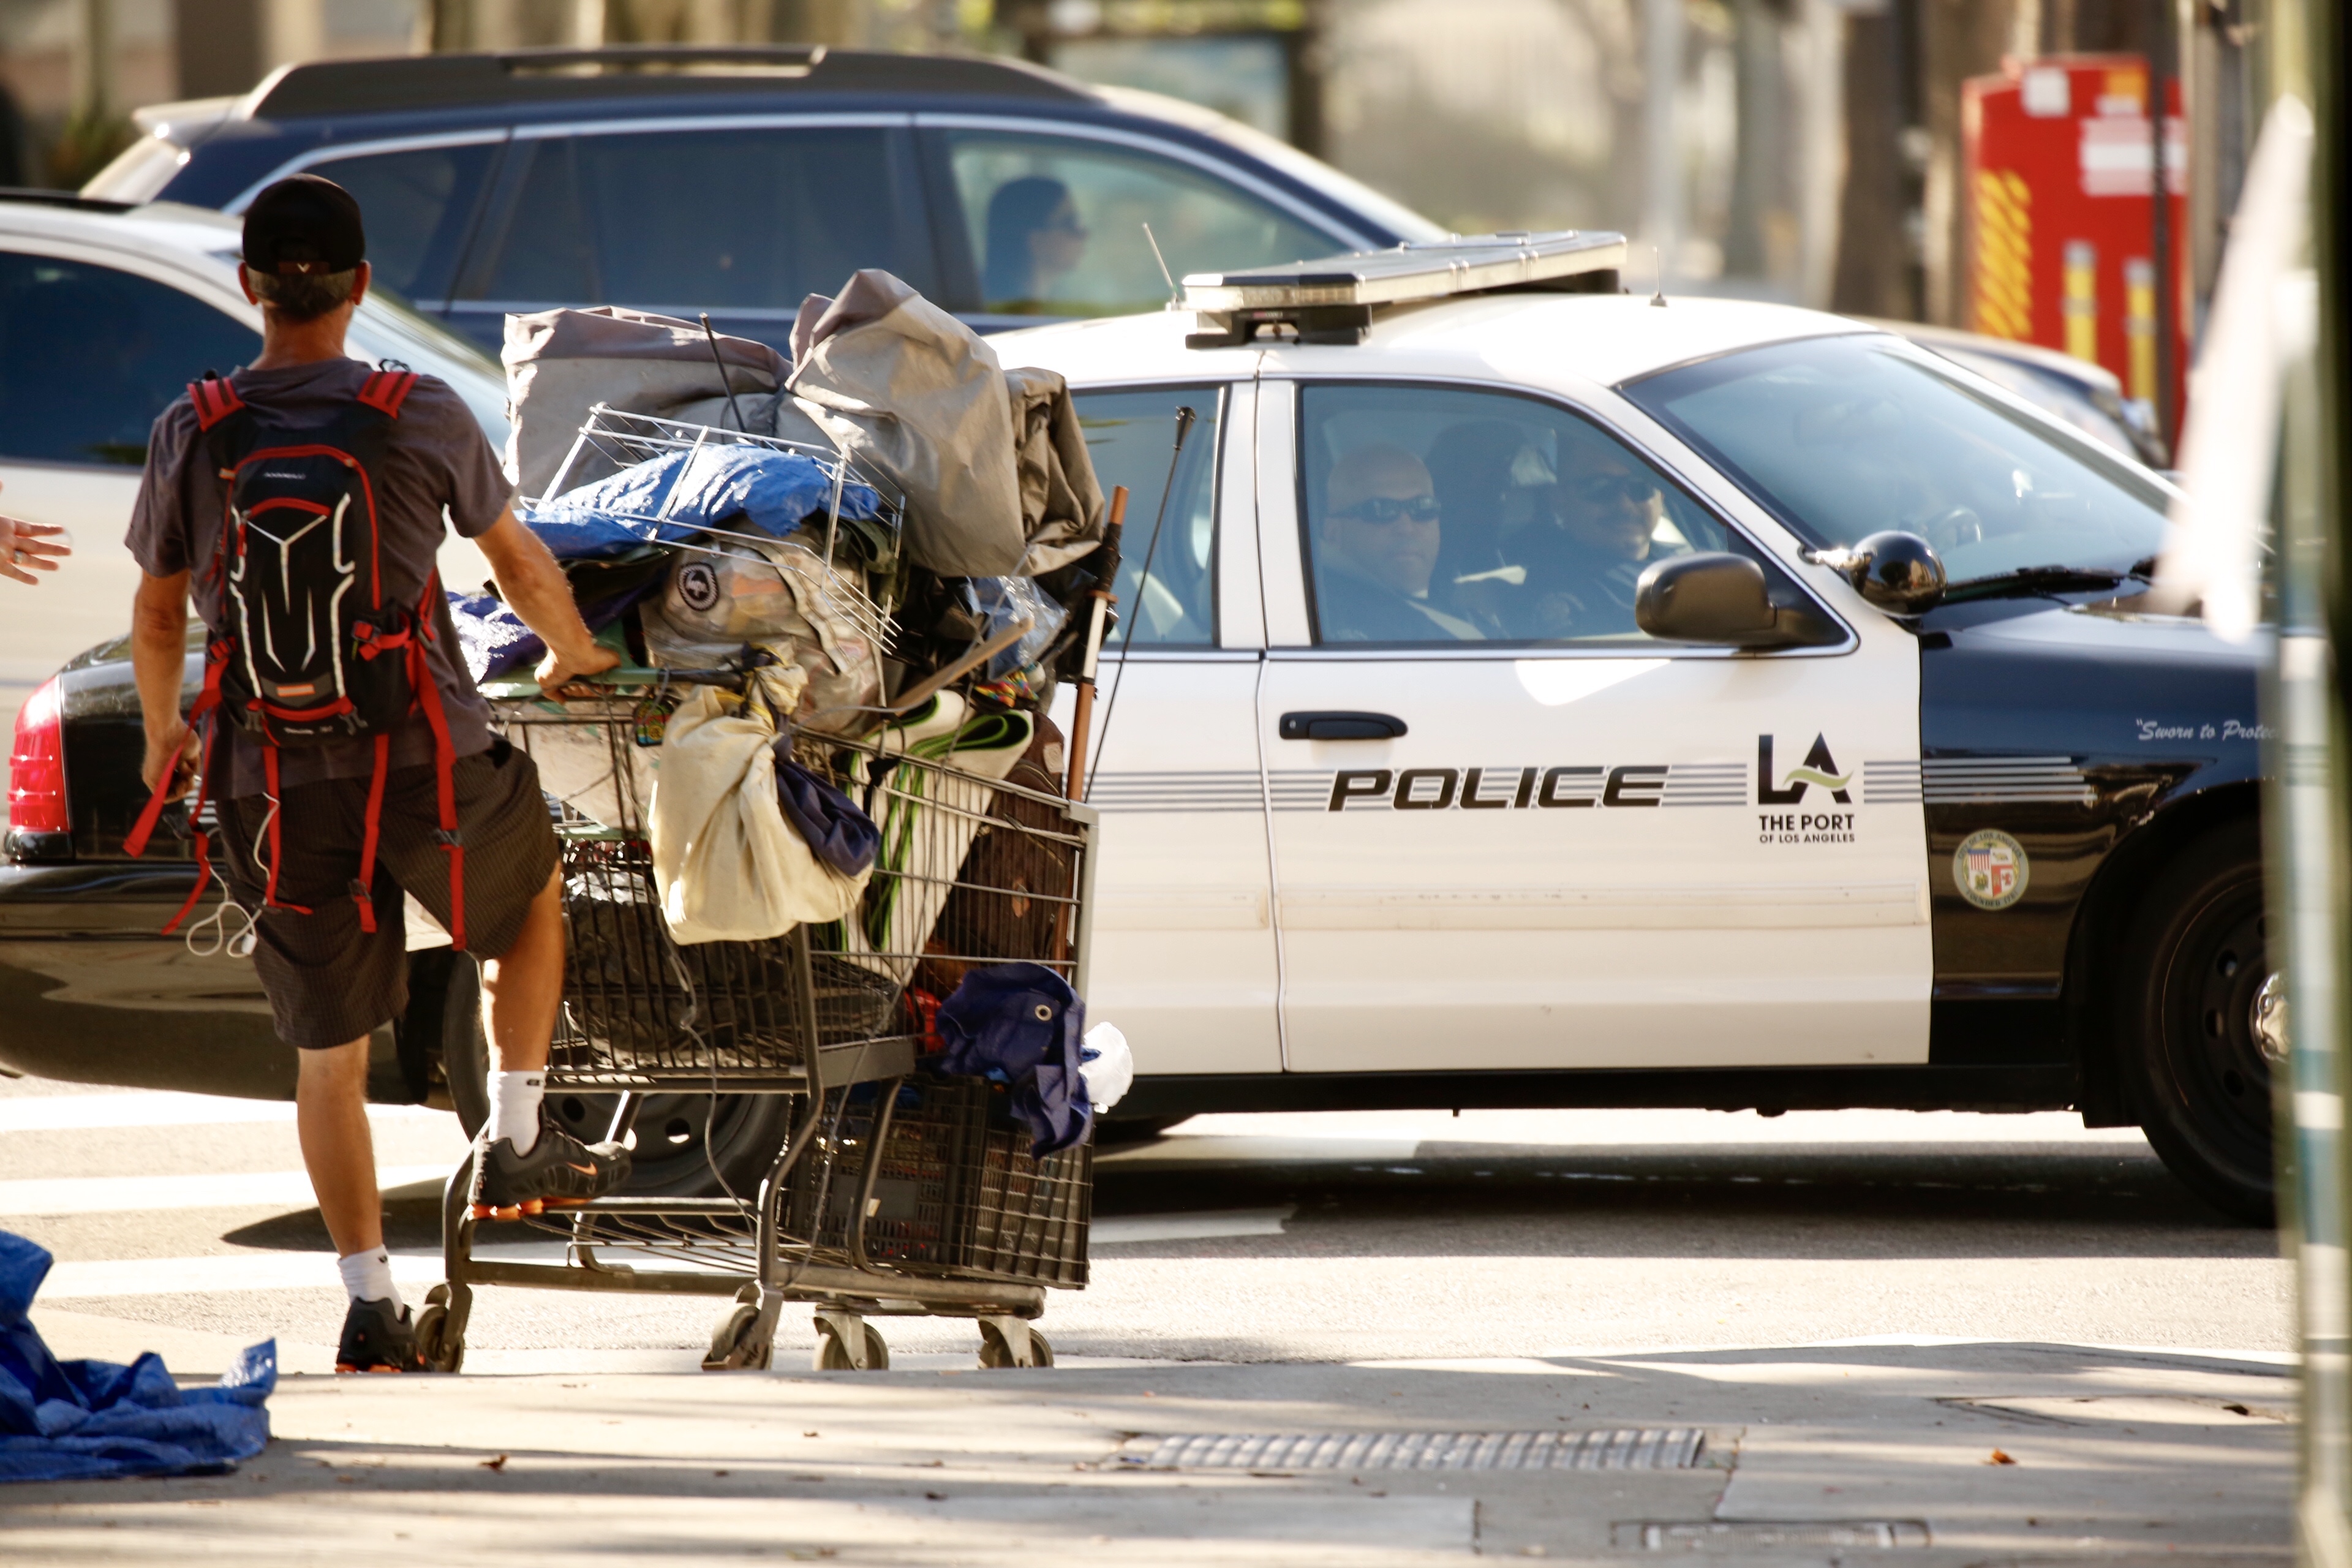 A ban with a backpack pushes a cart full of belongings down a street. A police car is present in the background.